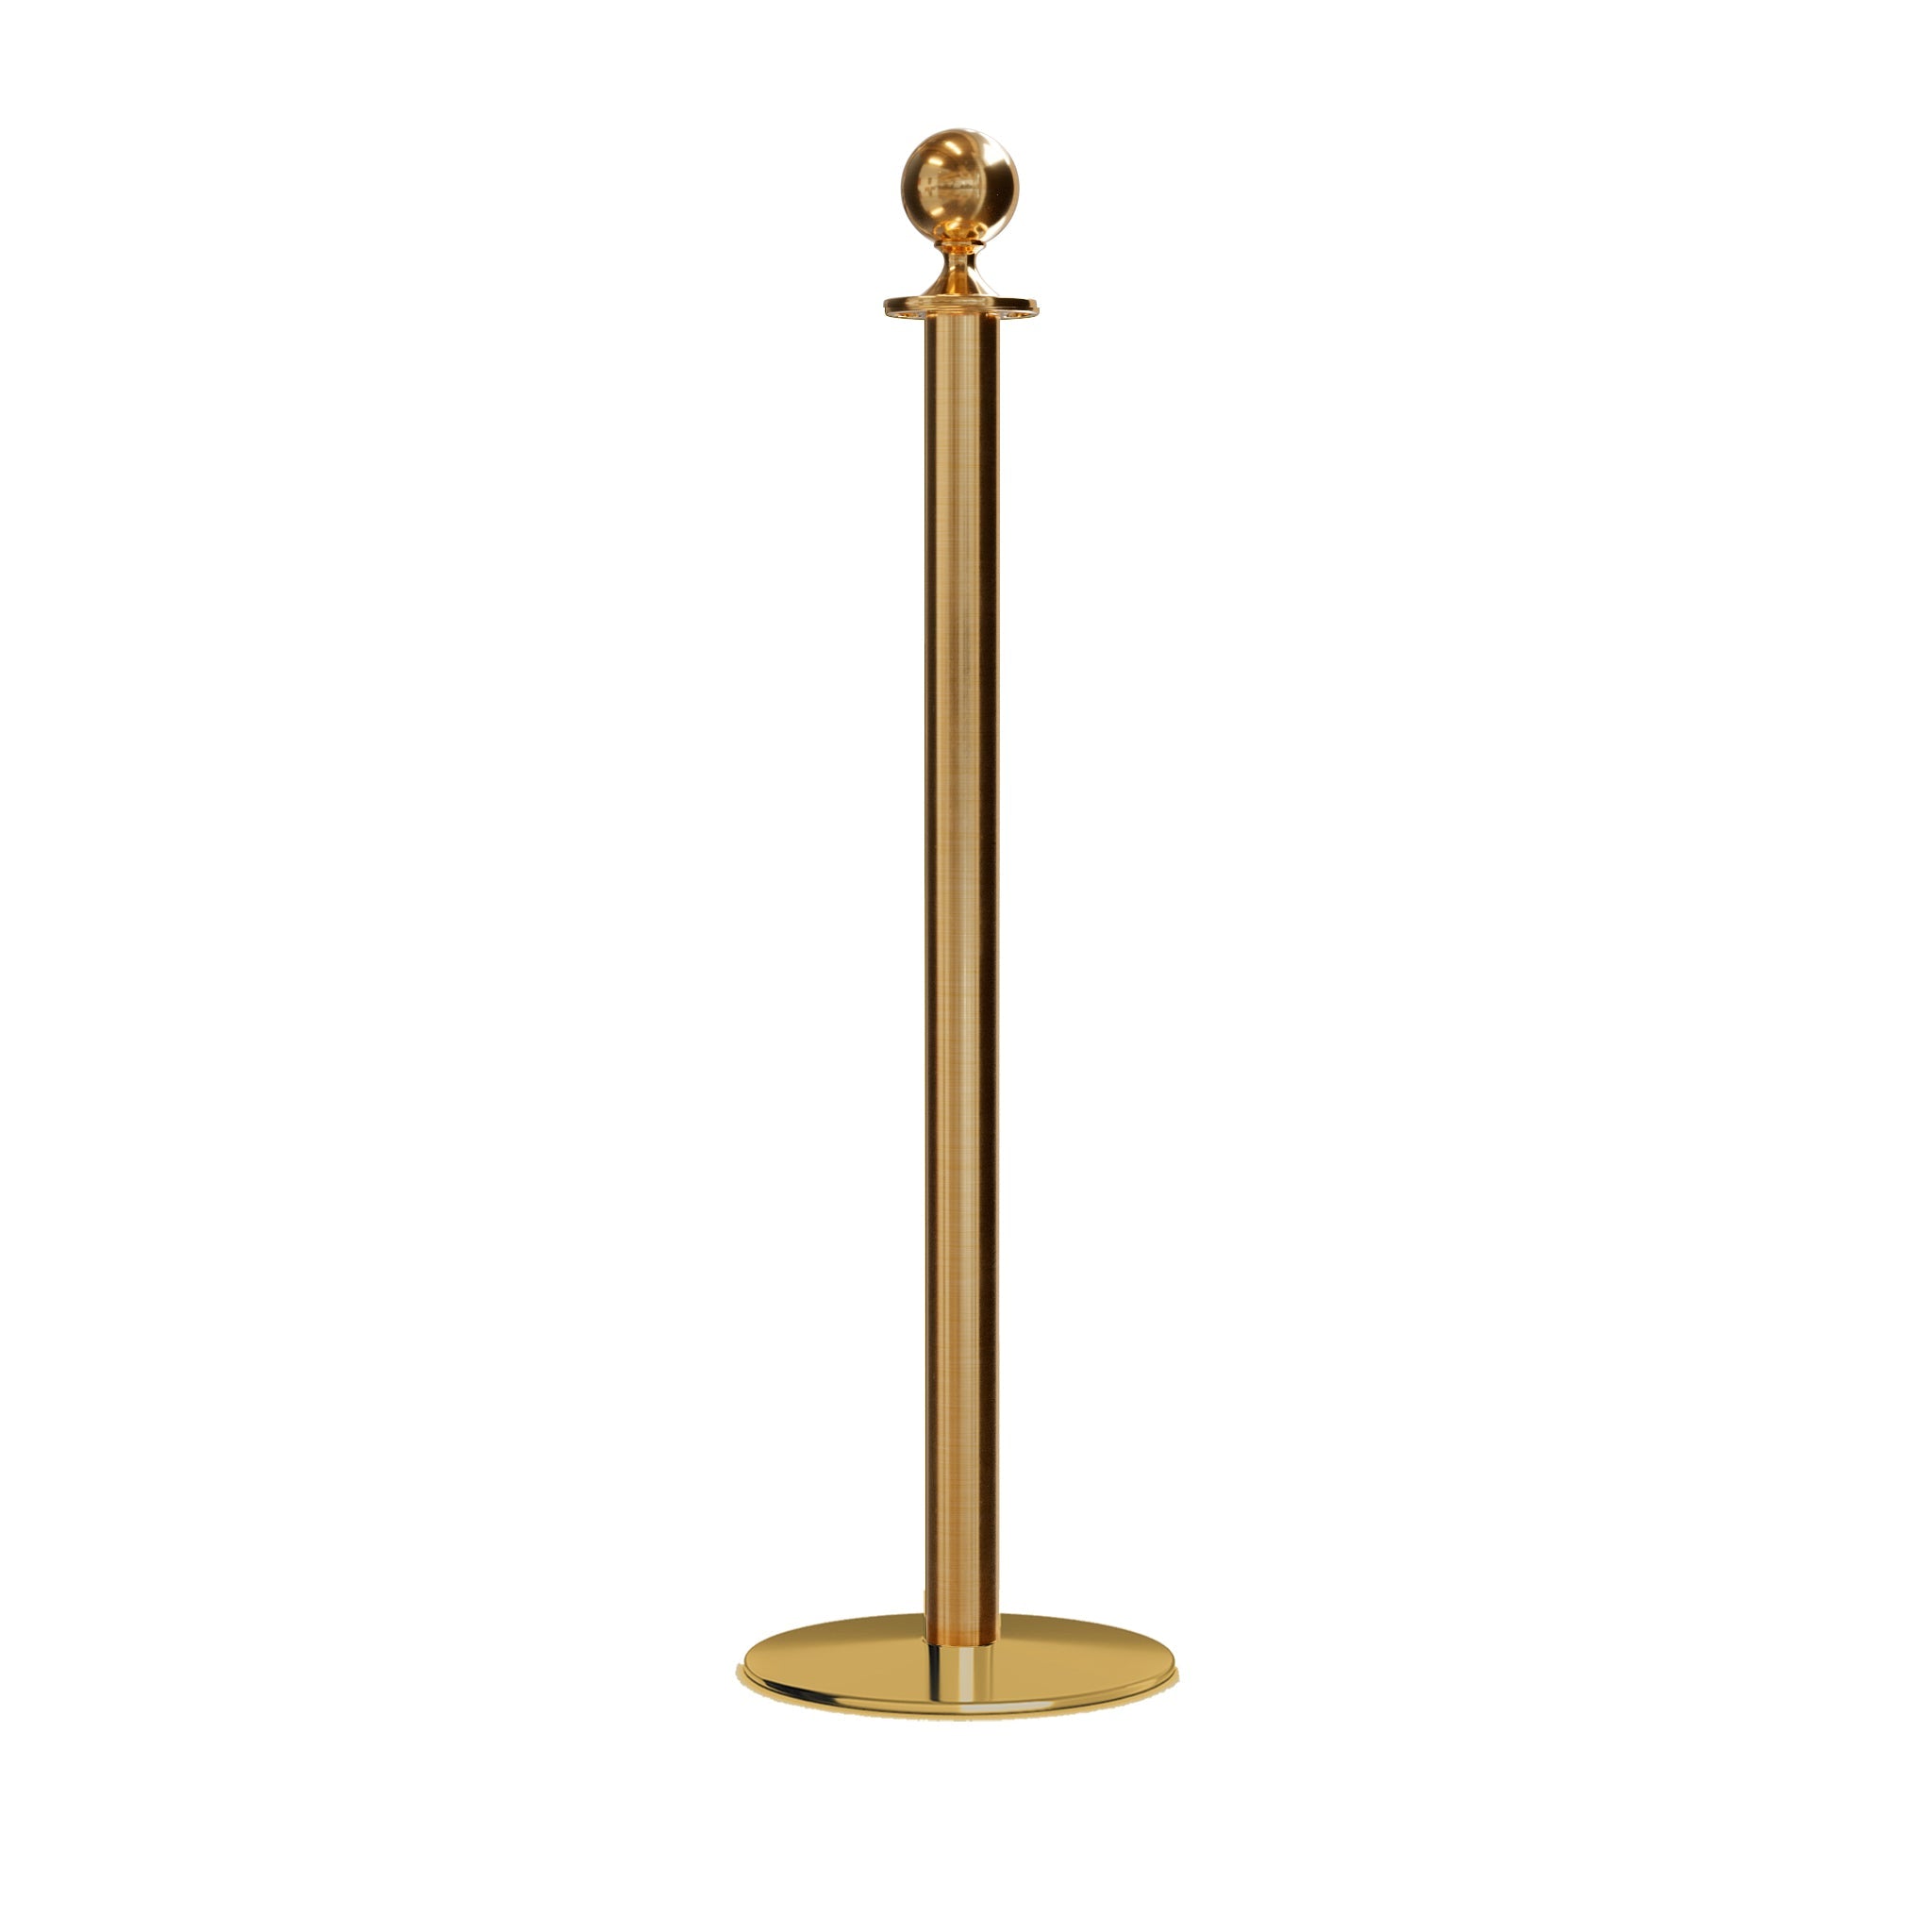 Ball Top Rope Stanchion with Low Profile Base - Montour Line